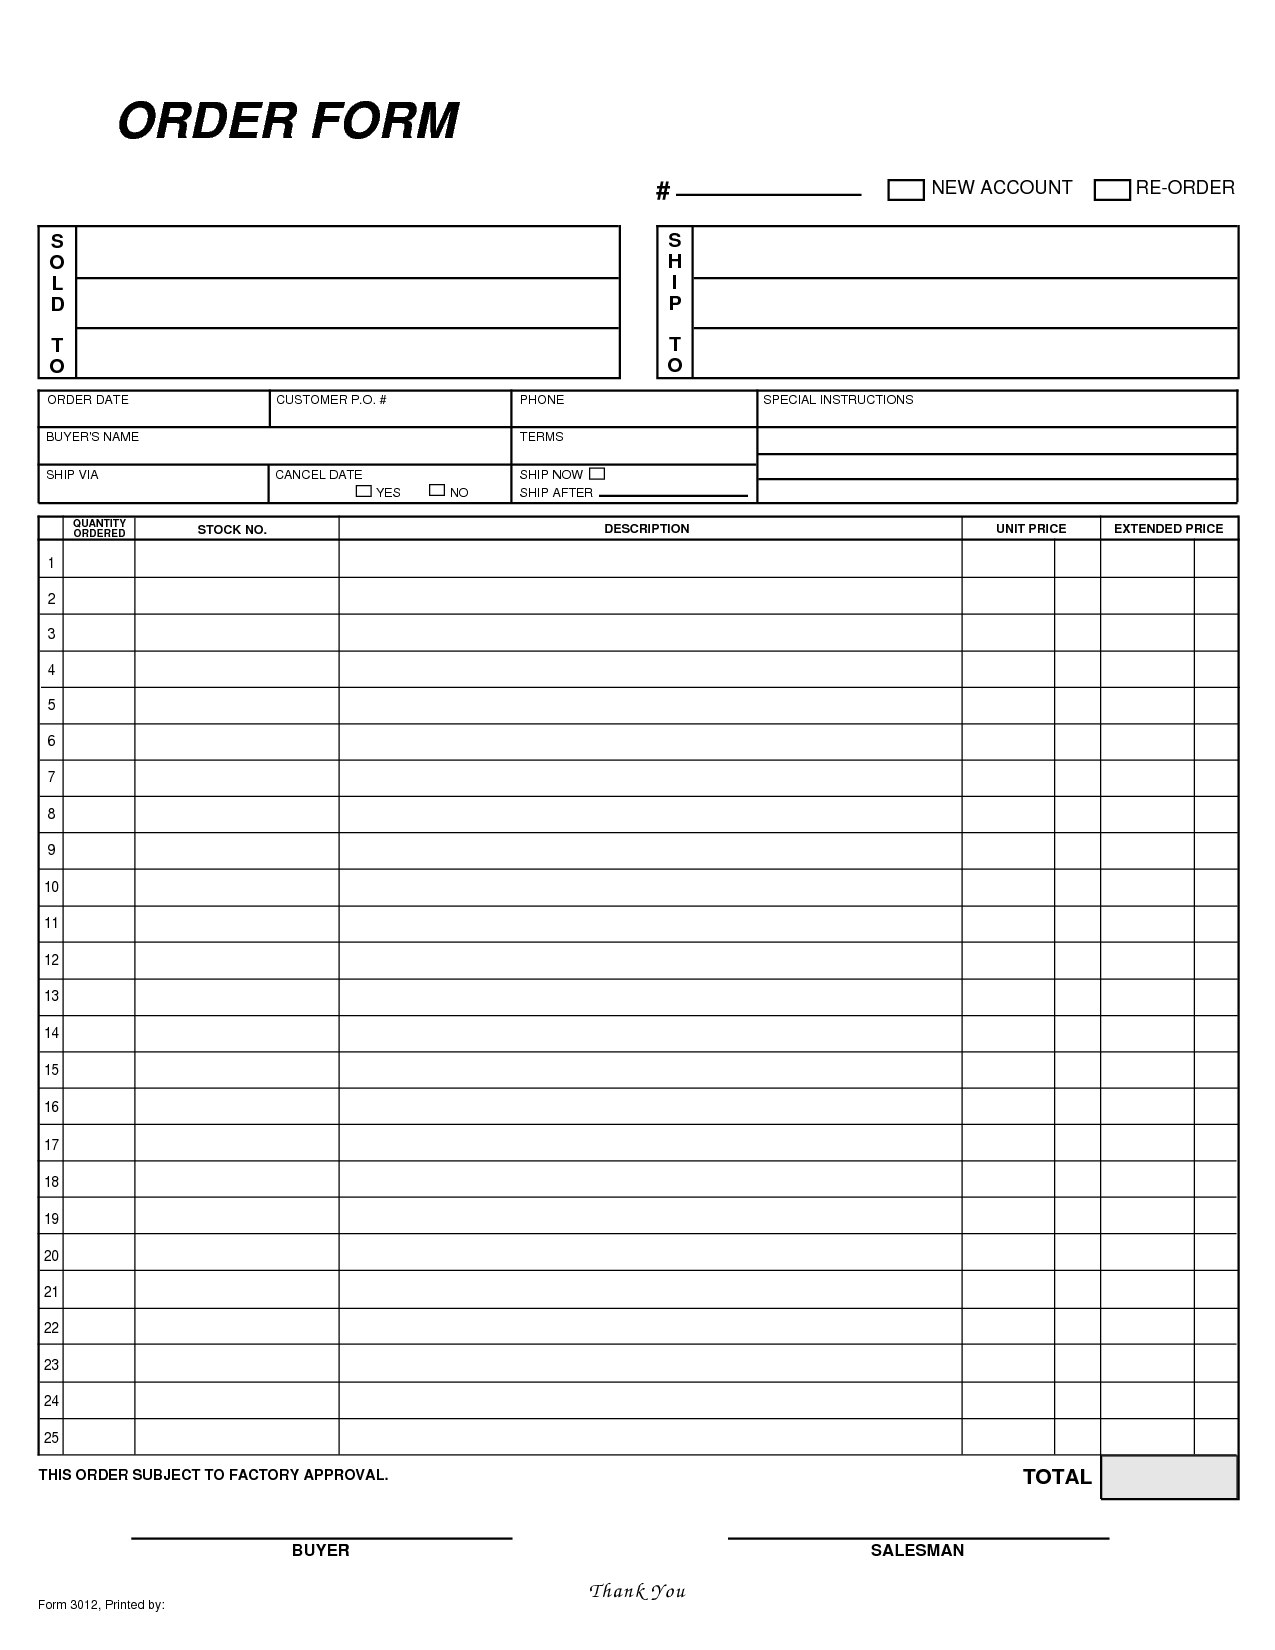 Blank Order Forms For T Shirts  Azərbaycan Dillər Universiteti with Blank T Shirt Order Form Template